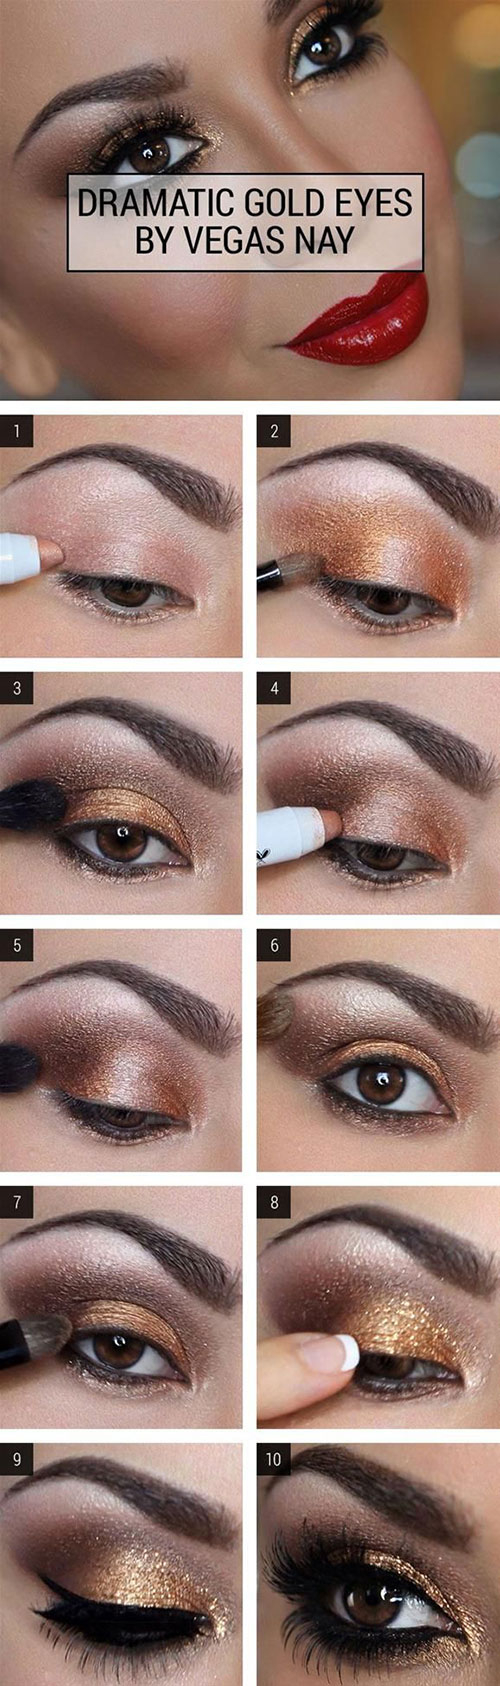 Light Silver Eye Makeup How To Do Smokey Eye Makeup Top 10 Tutorial Pictures For 2019